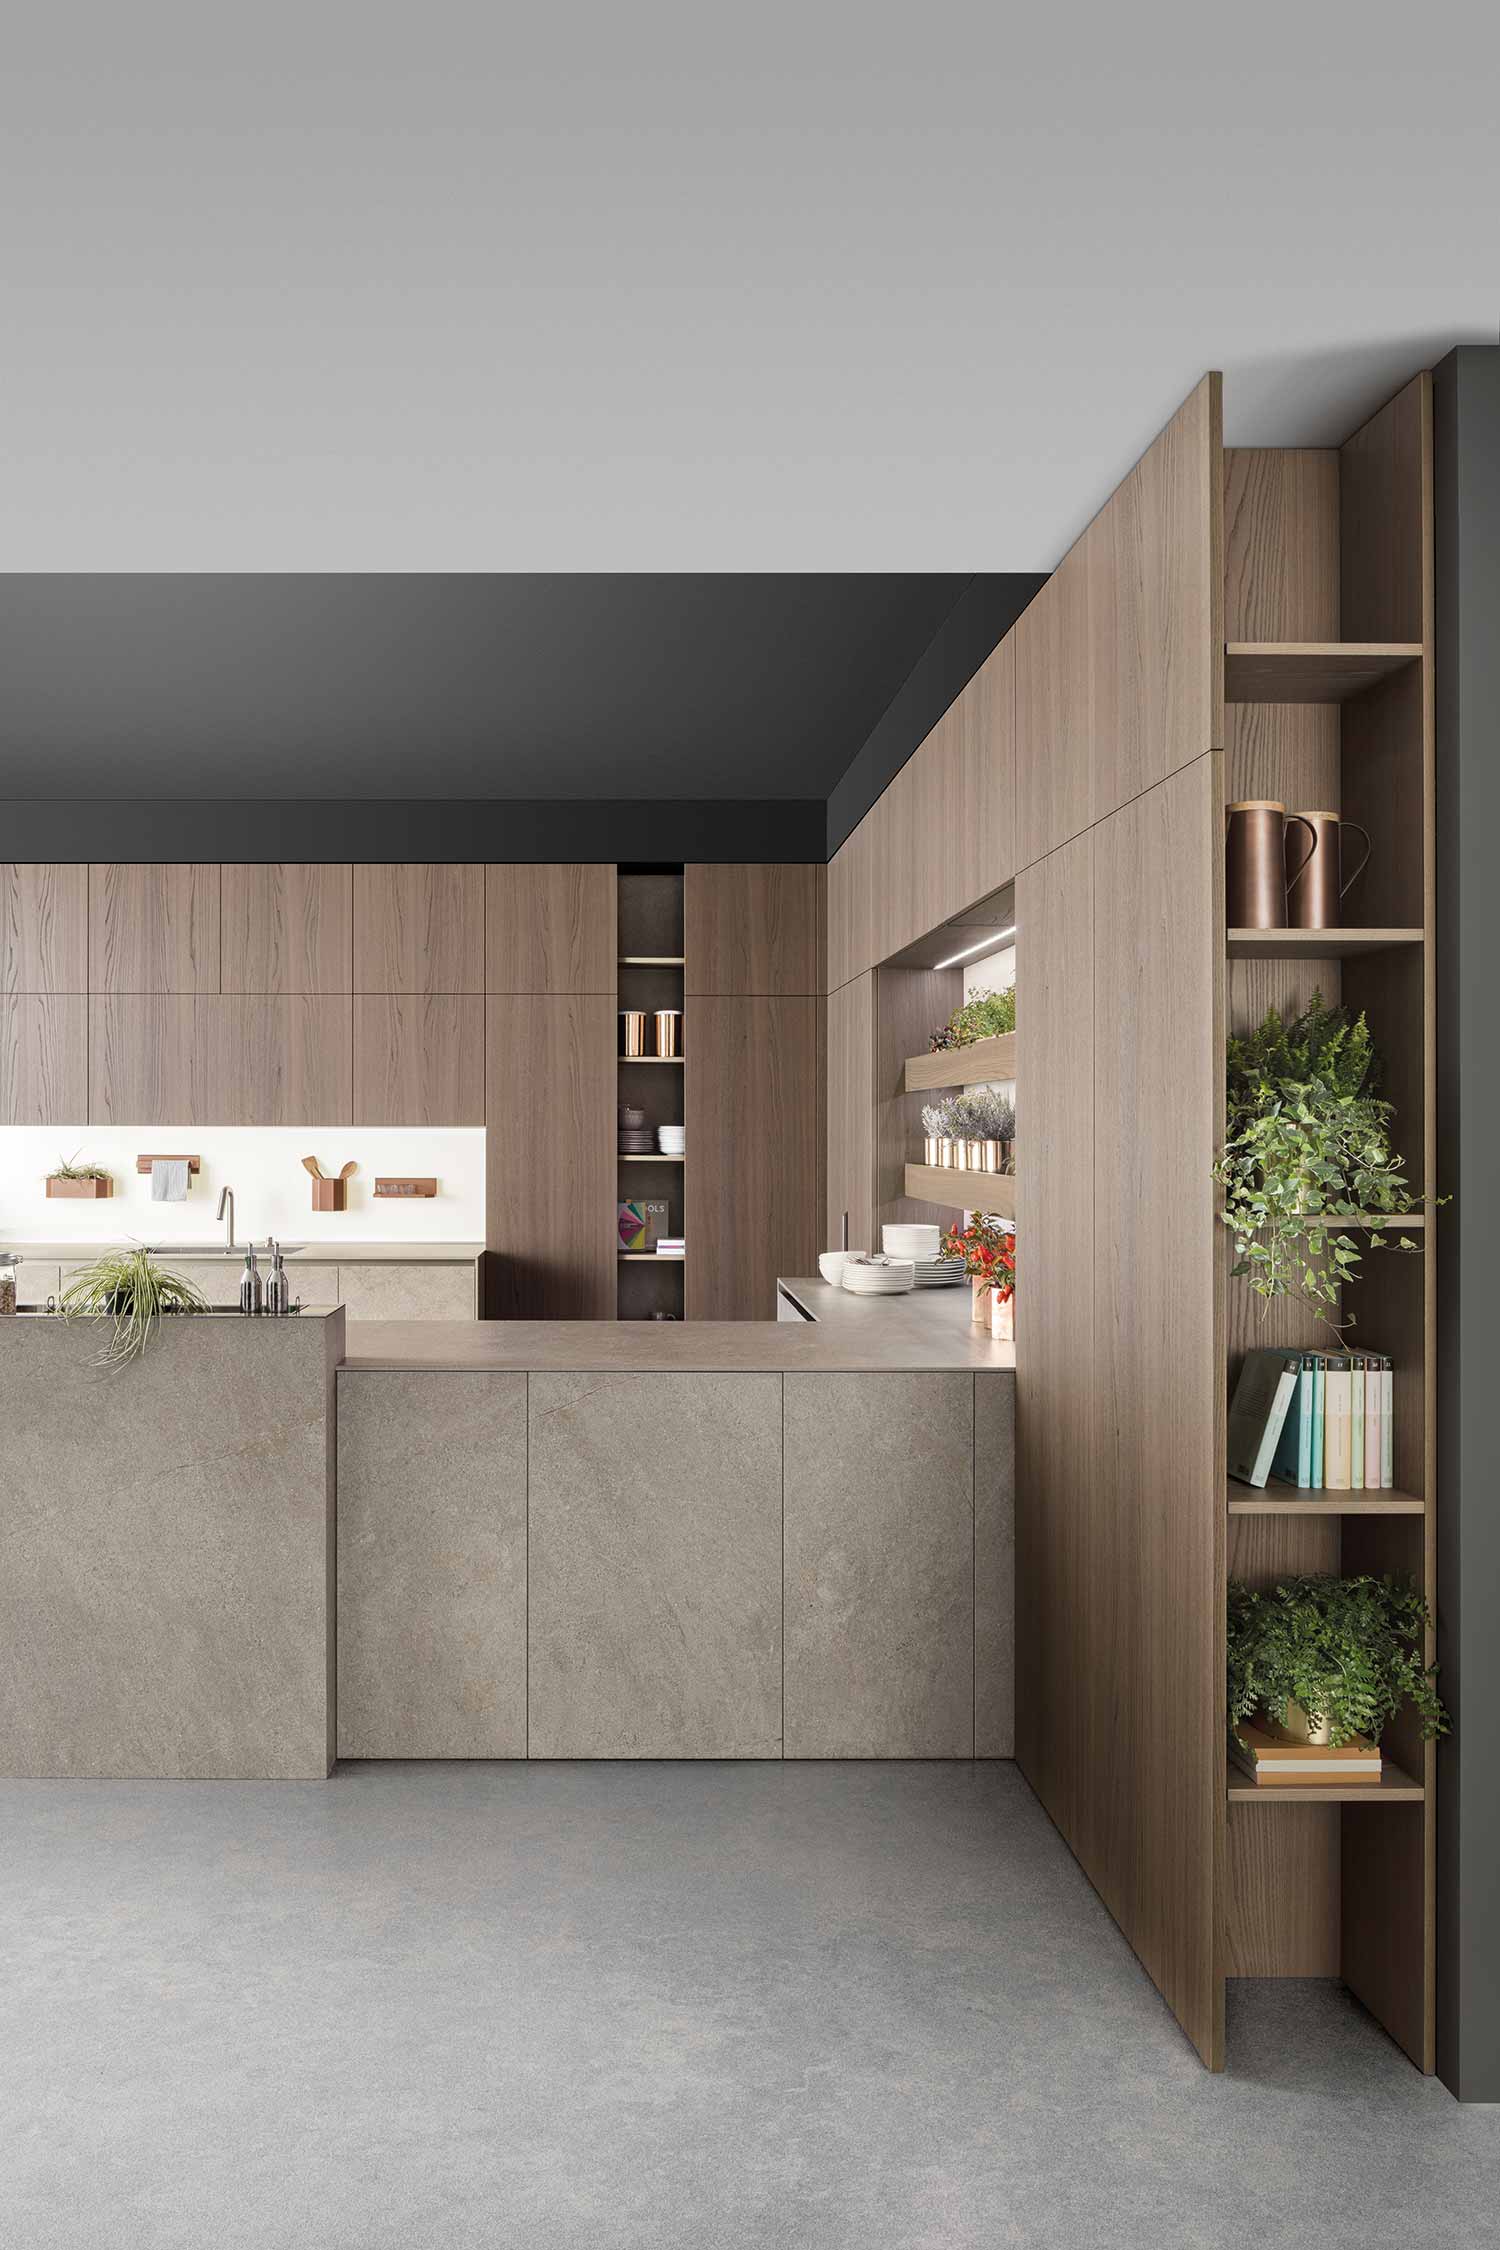 The open unit at the end of the kitchen welcomes people into the kitchen space.